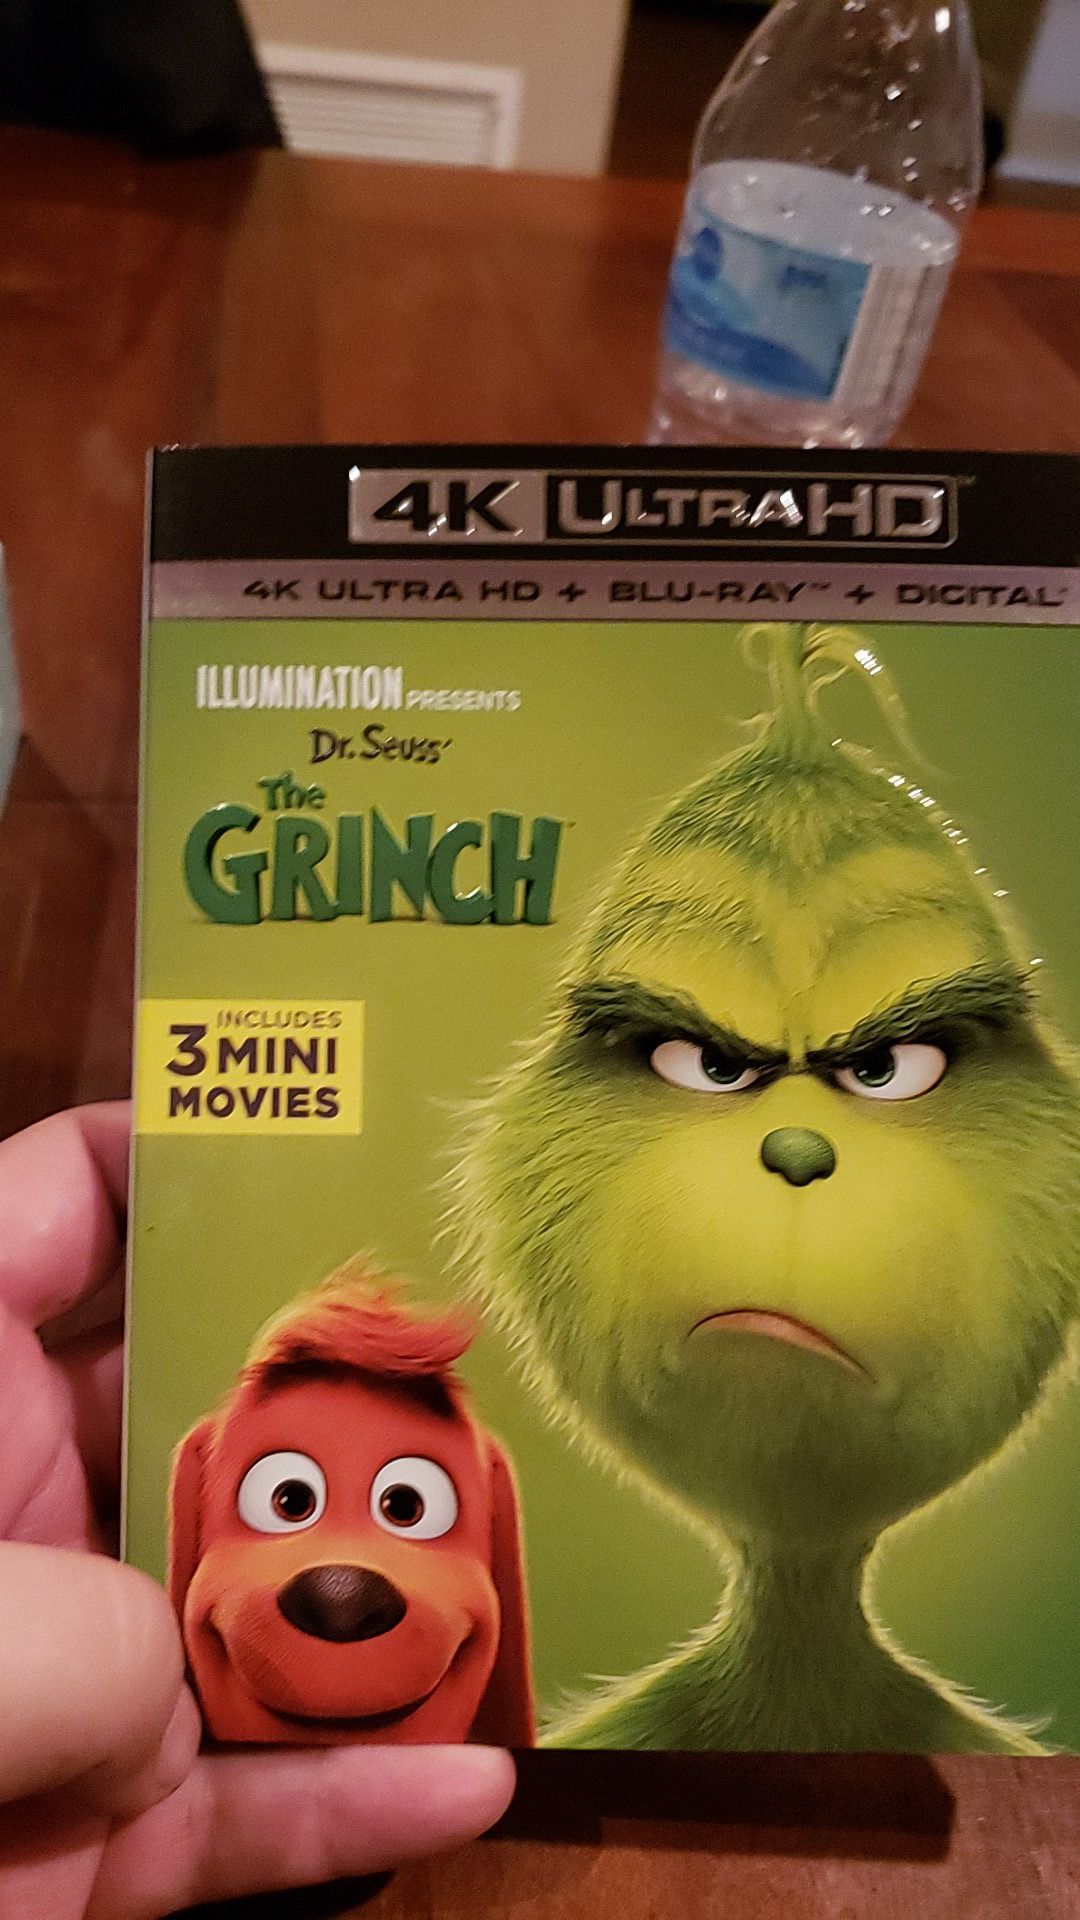 The grinch 4k blu ray combo brand new sealed